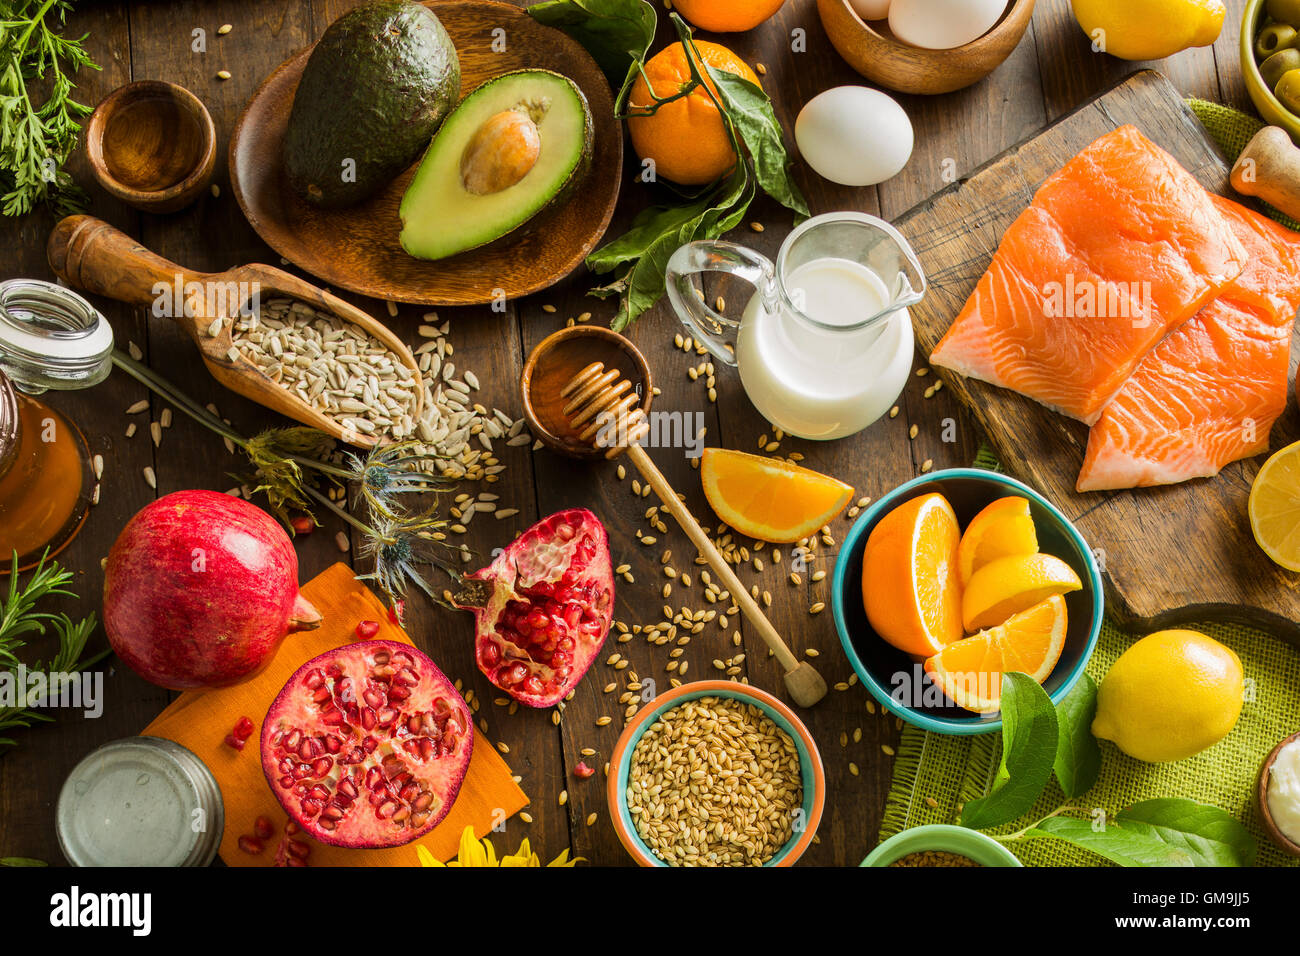 Overhead view of messy table with various fruits and seeds Stock Photo